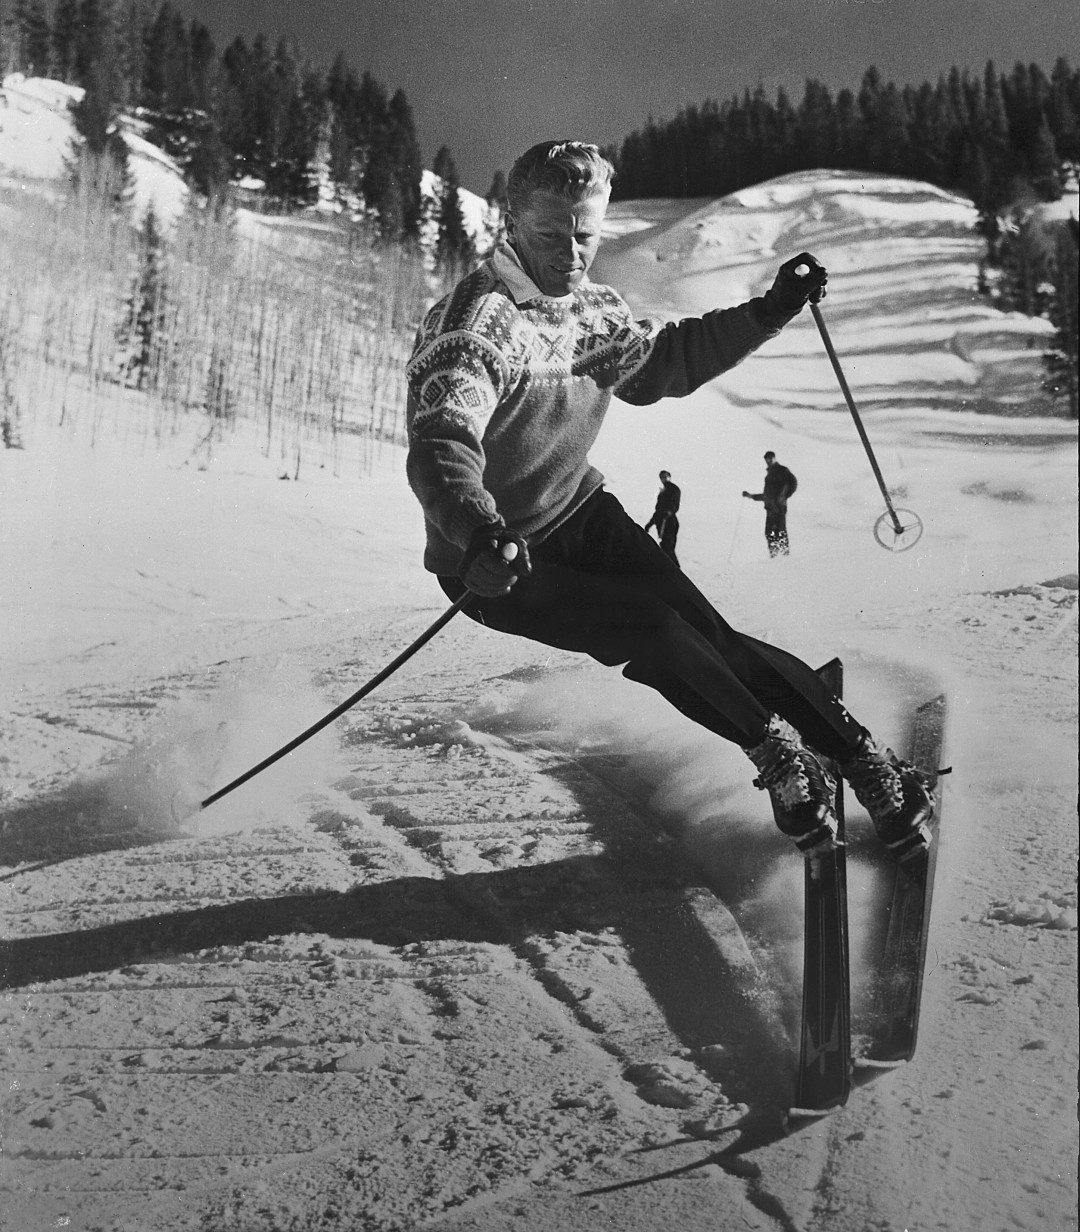 An elegant skier, Stein Eriksen was an Olympian, instructor, skiing ambassador and charming personality. Credit: Deer Valley